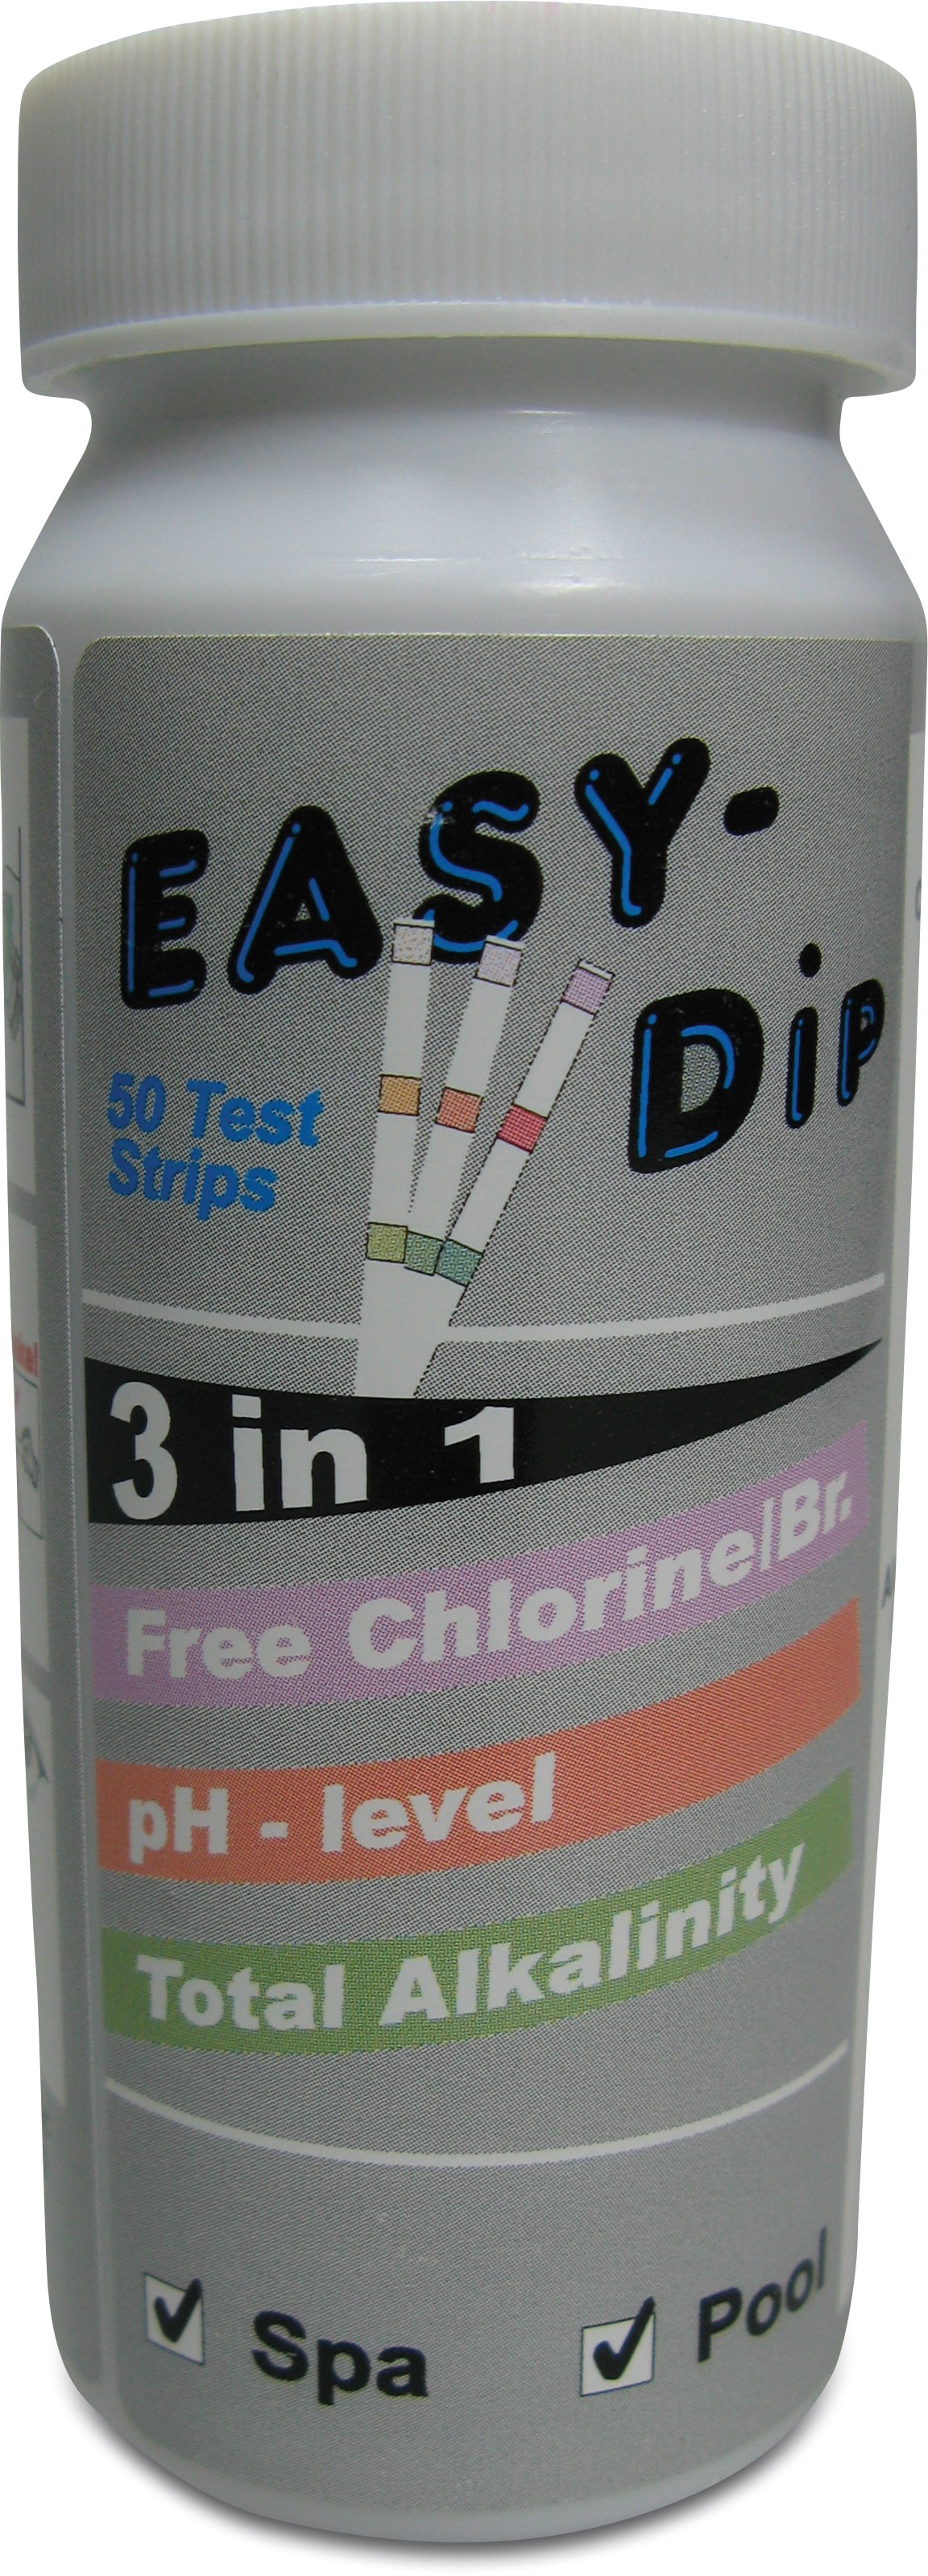 Pool-I.D. 5-in-1 test strips for the measurement of pH, free Chlorine, Bromine Alkalinity, Total Hardness and Cyanic Acid values 50 pcs